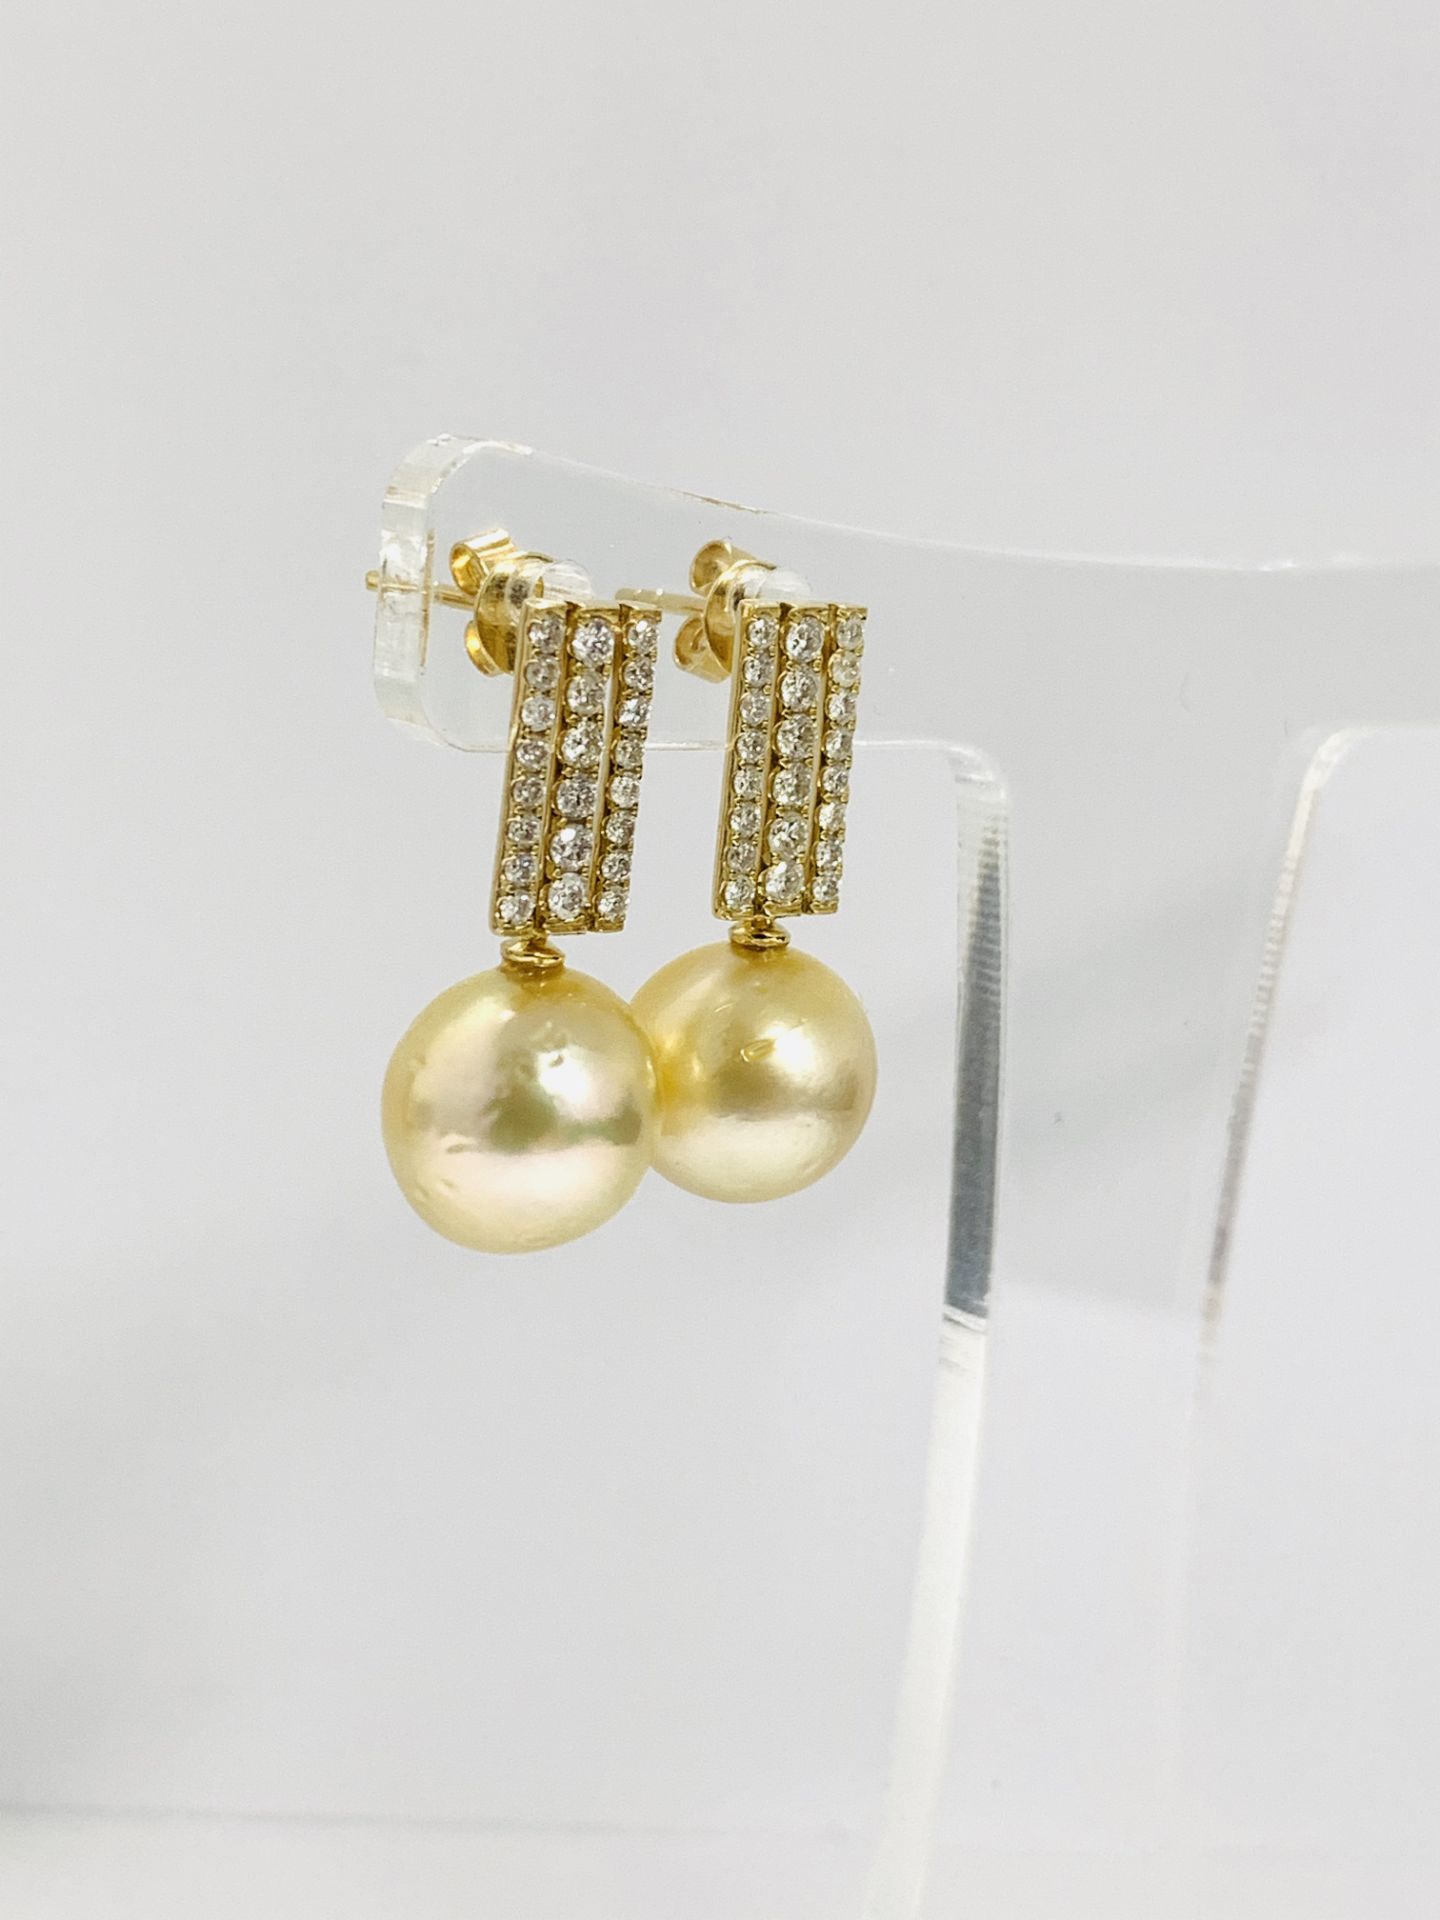 14K Yellow Gold Pair Of Earrings - Image 8 of 12